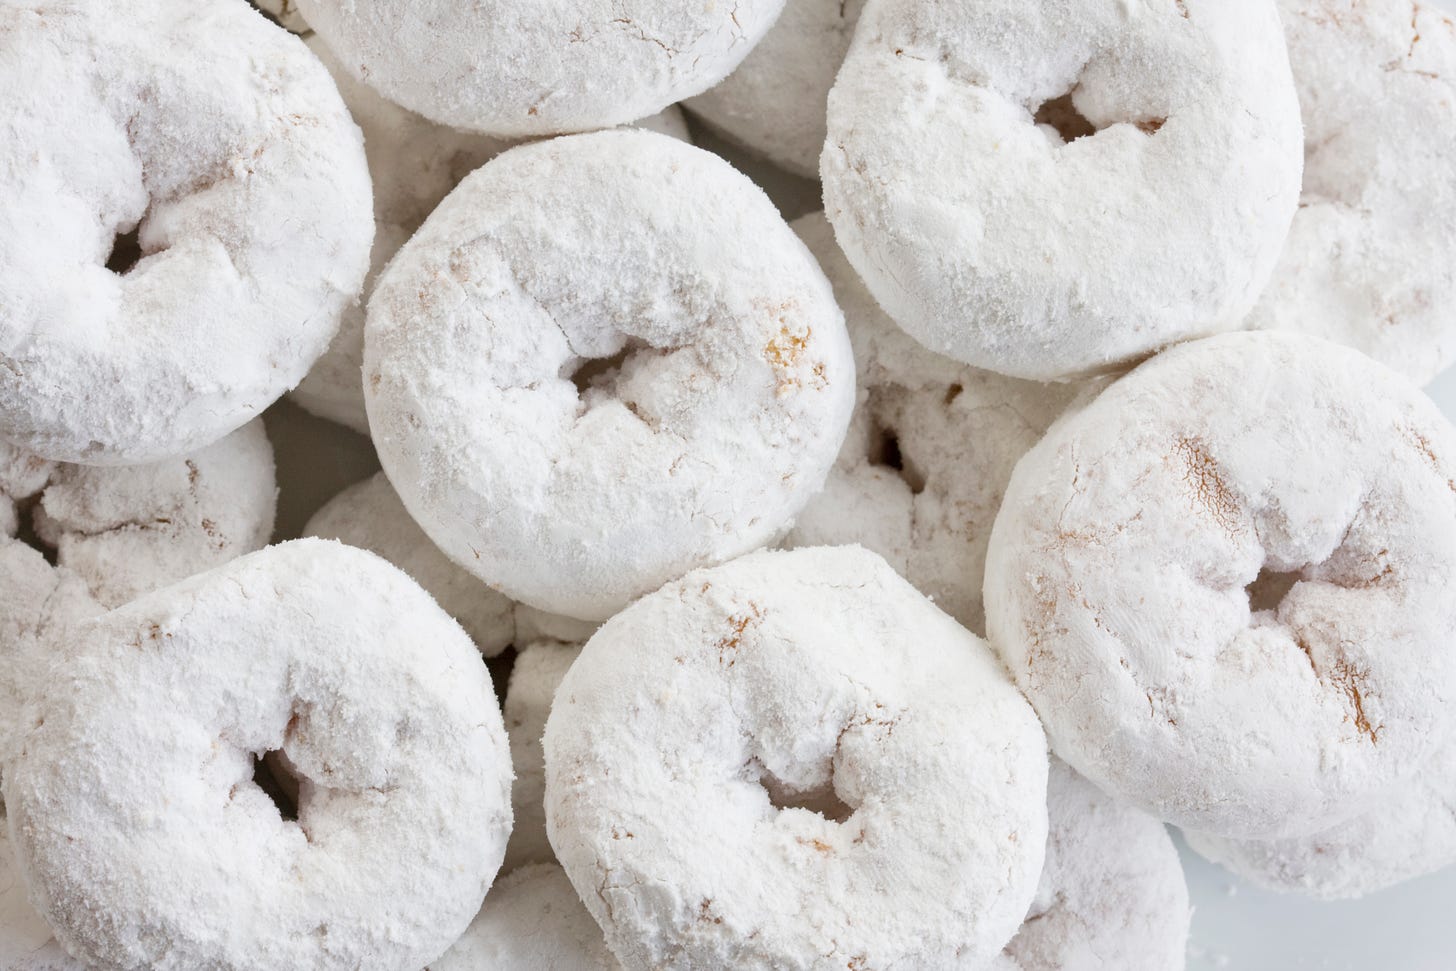 an overhead picture of many powdered sugar donuts stacked on top of each other